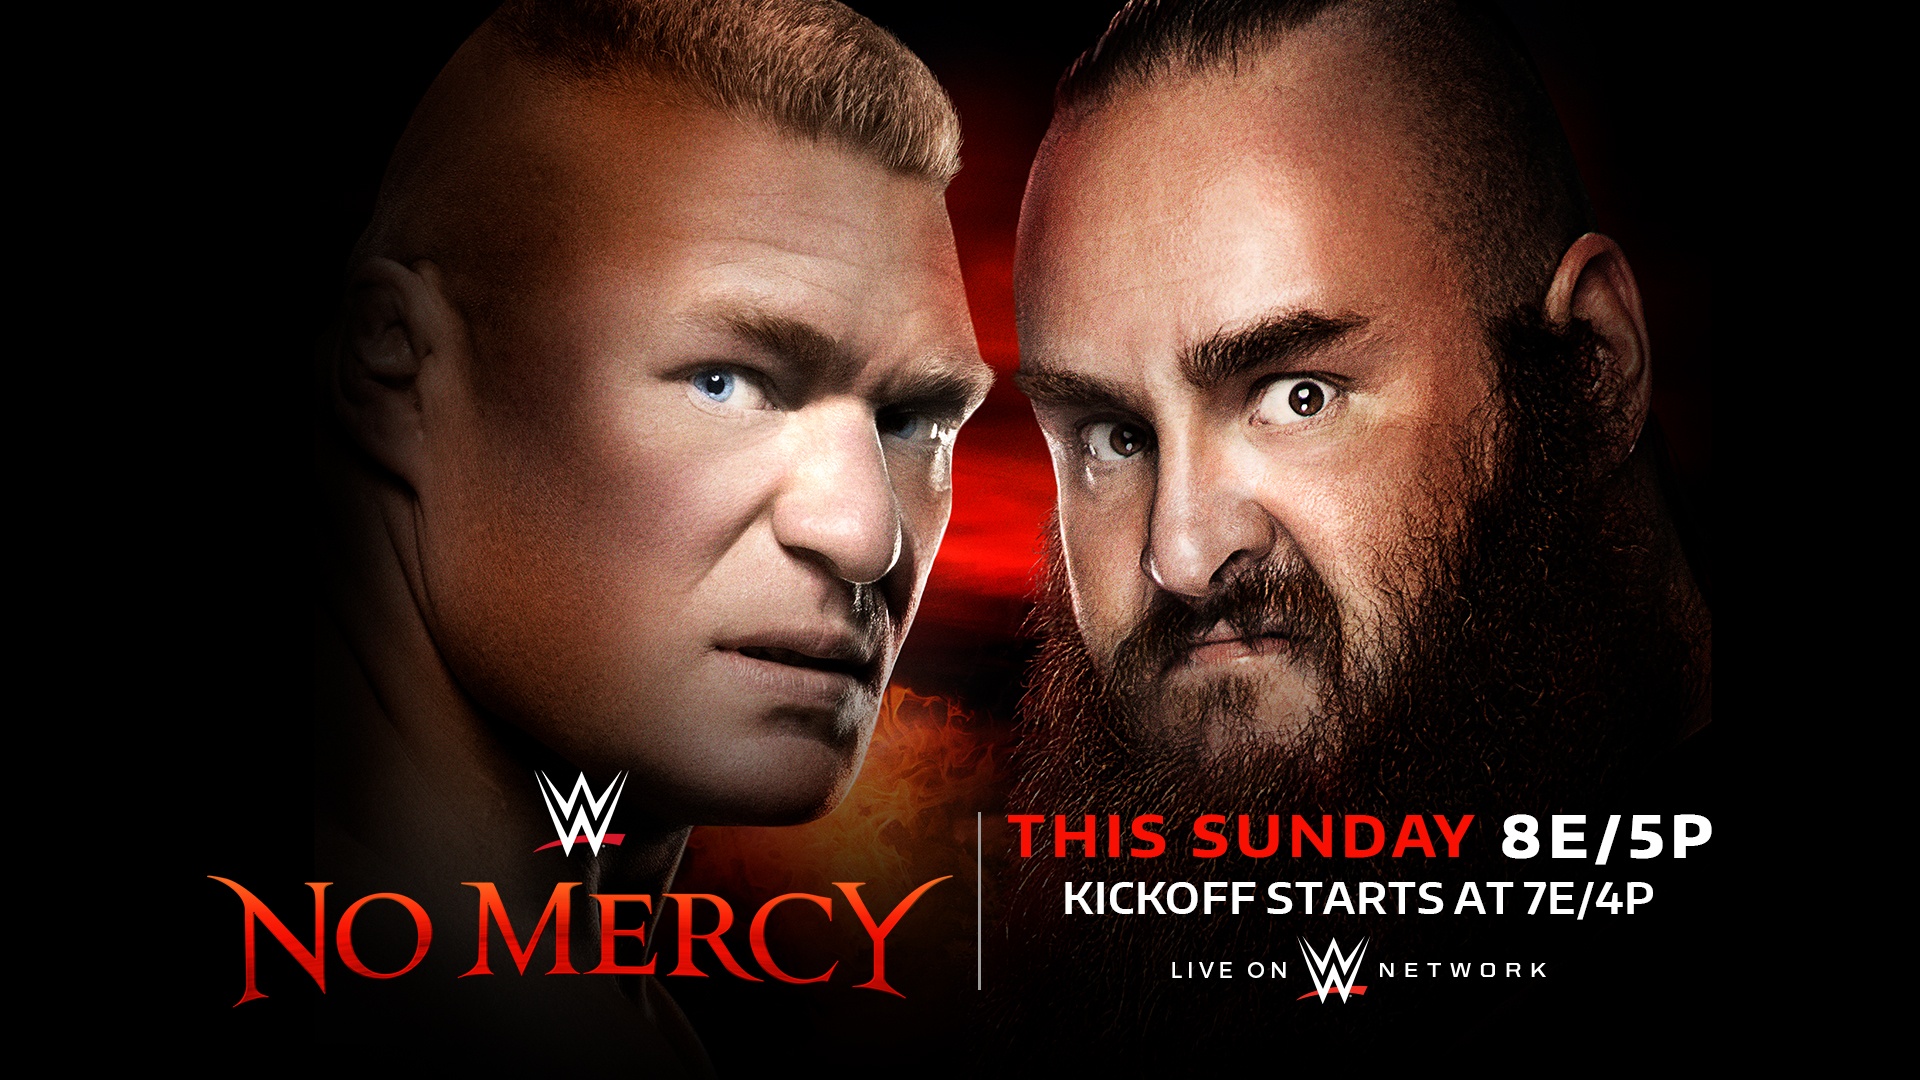 No Mercy to feature two "WrestleManiaworthy" matches and five